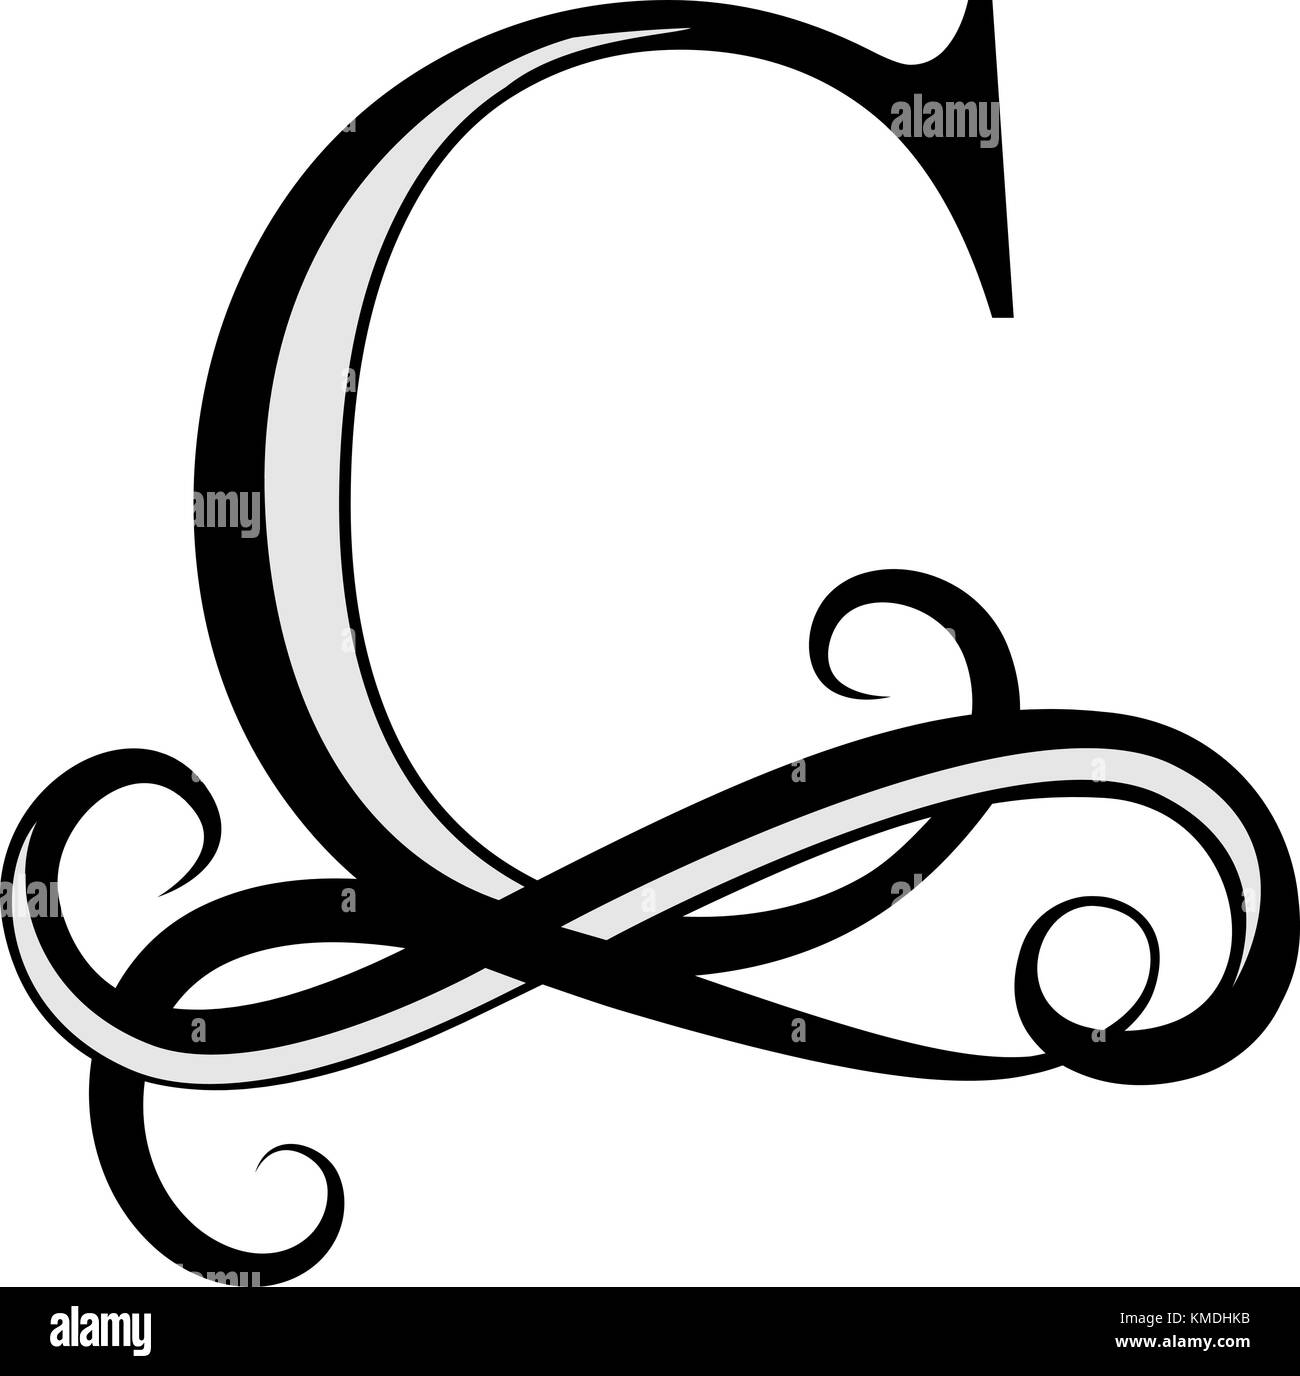 Capital Letter for Monograms and Logos. Beautiful letter Stock Vector ...